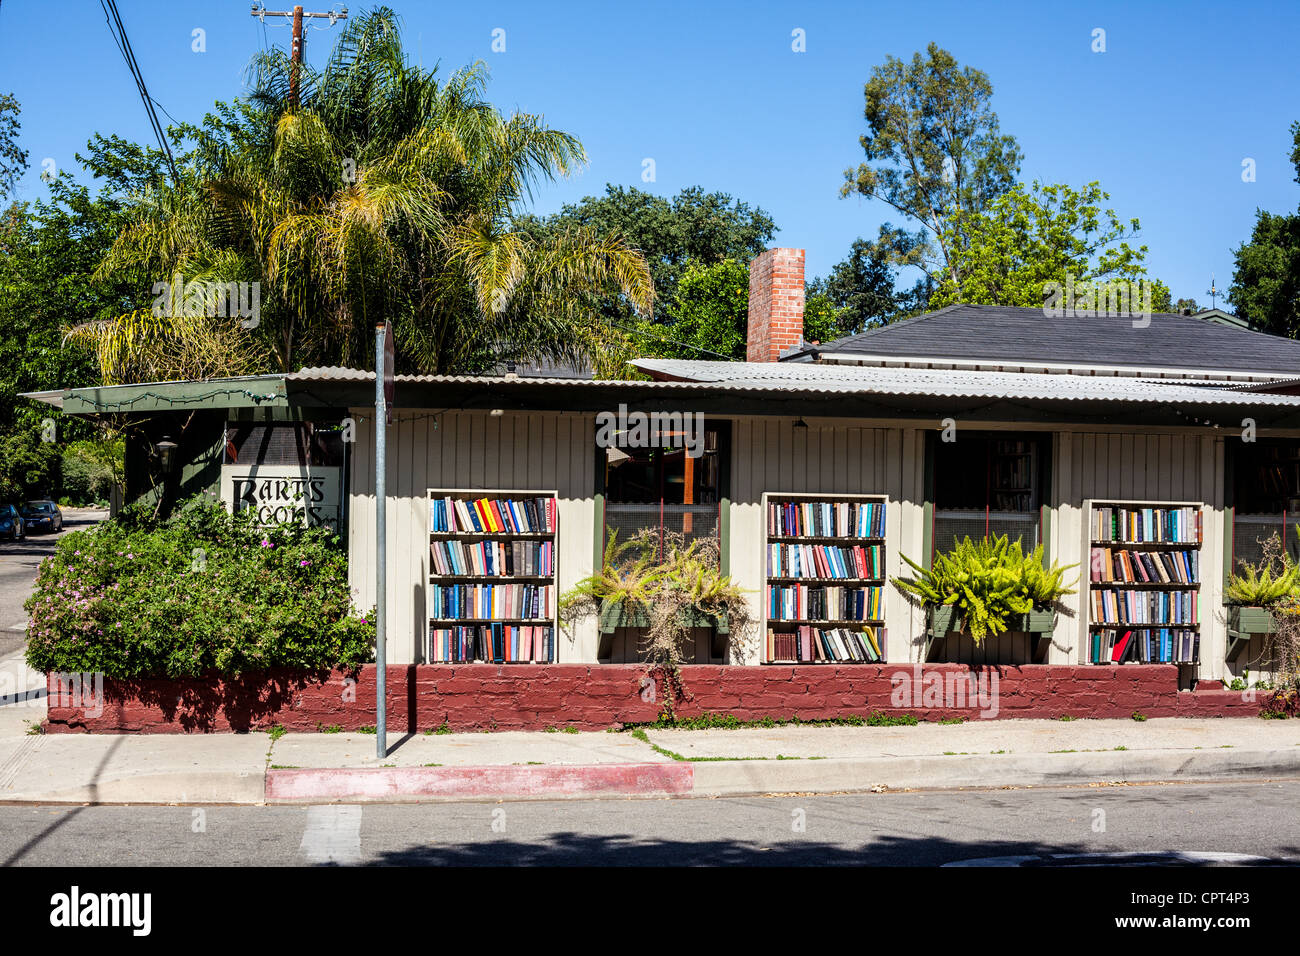 Bart's books used book store in Ojai California where some of the books are kept outside Stock Photo